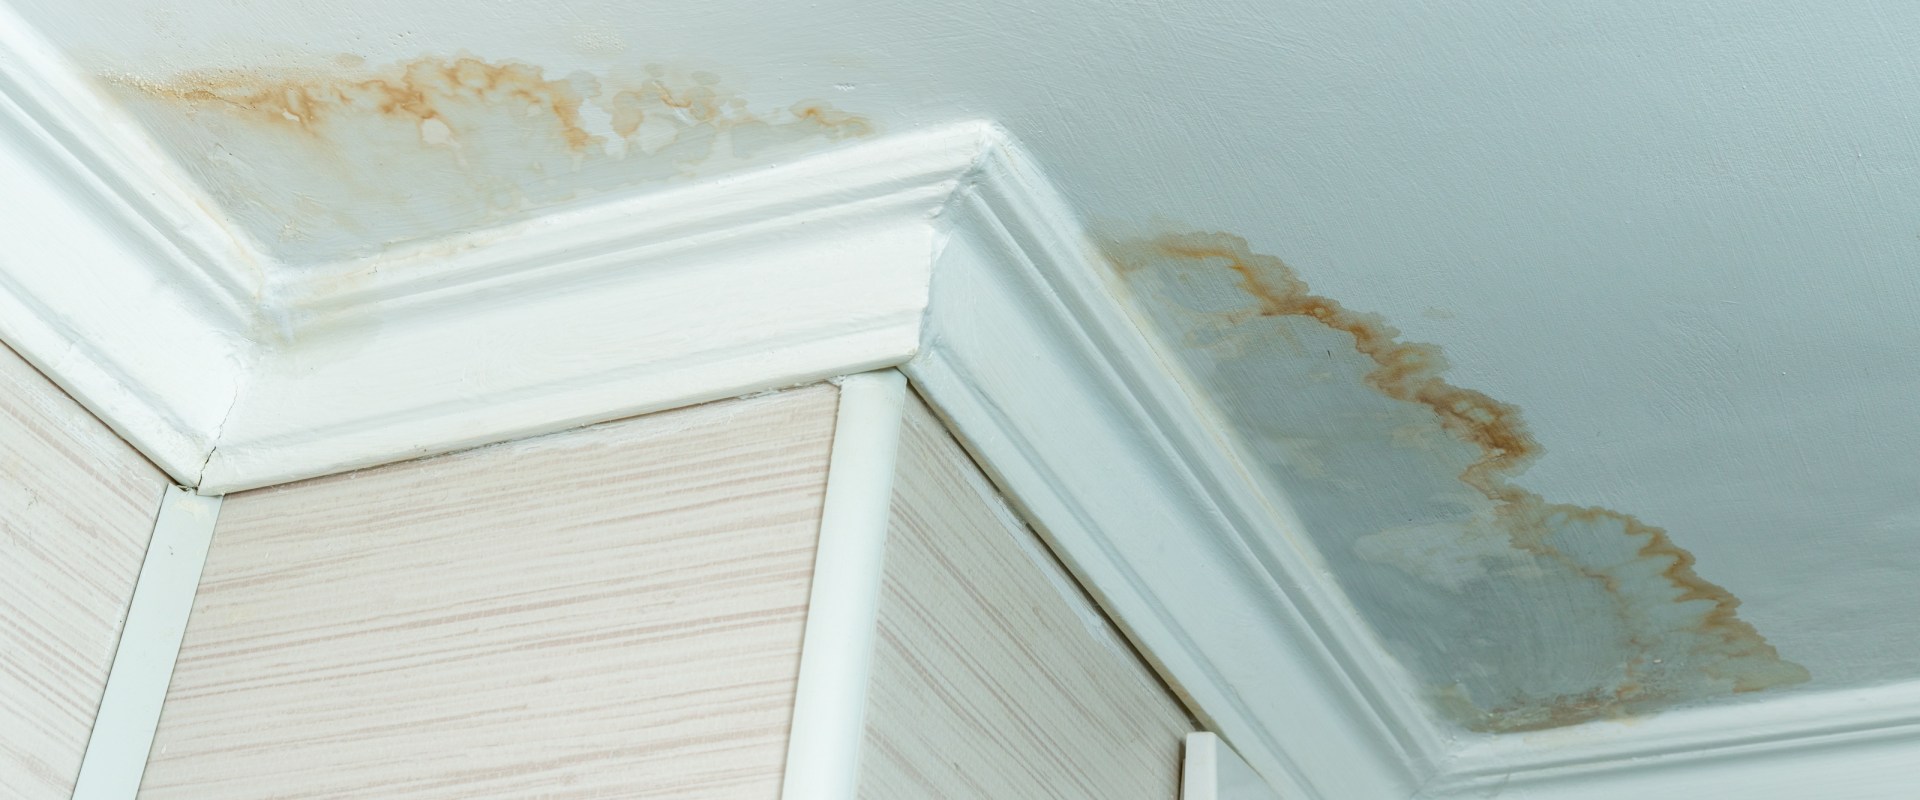 Can you paint over water damaged walls?